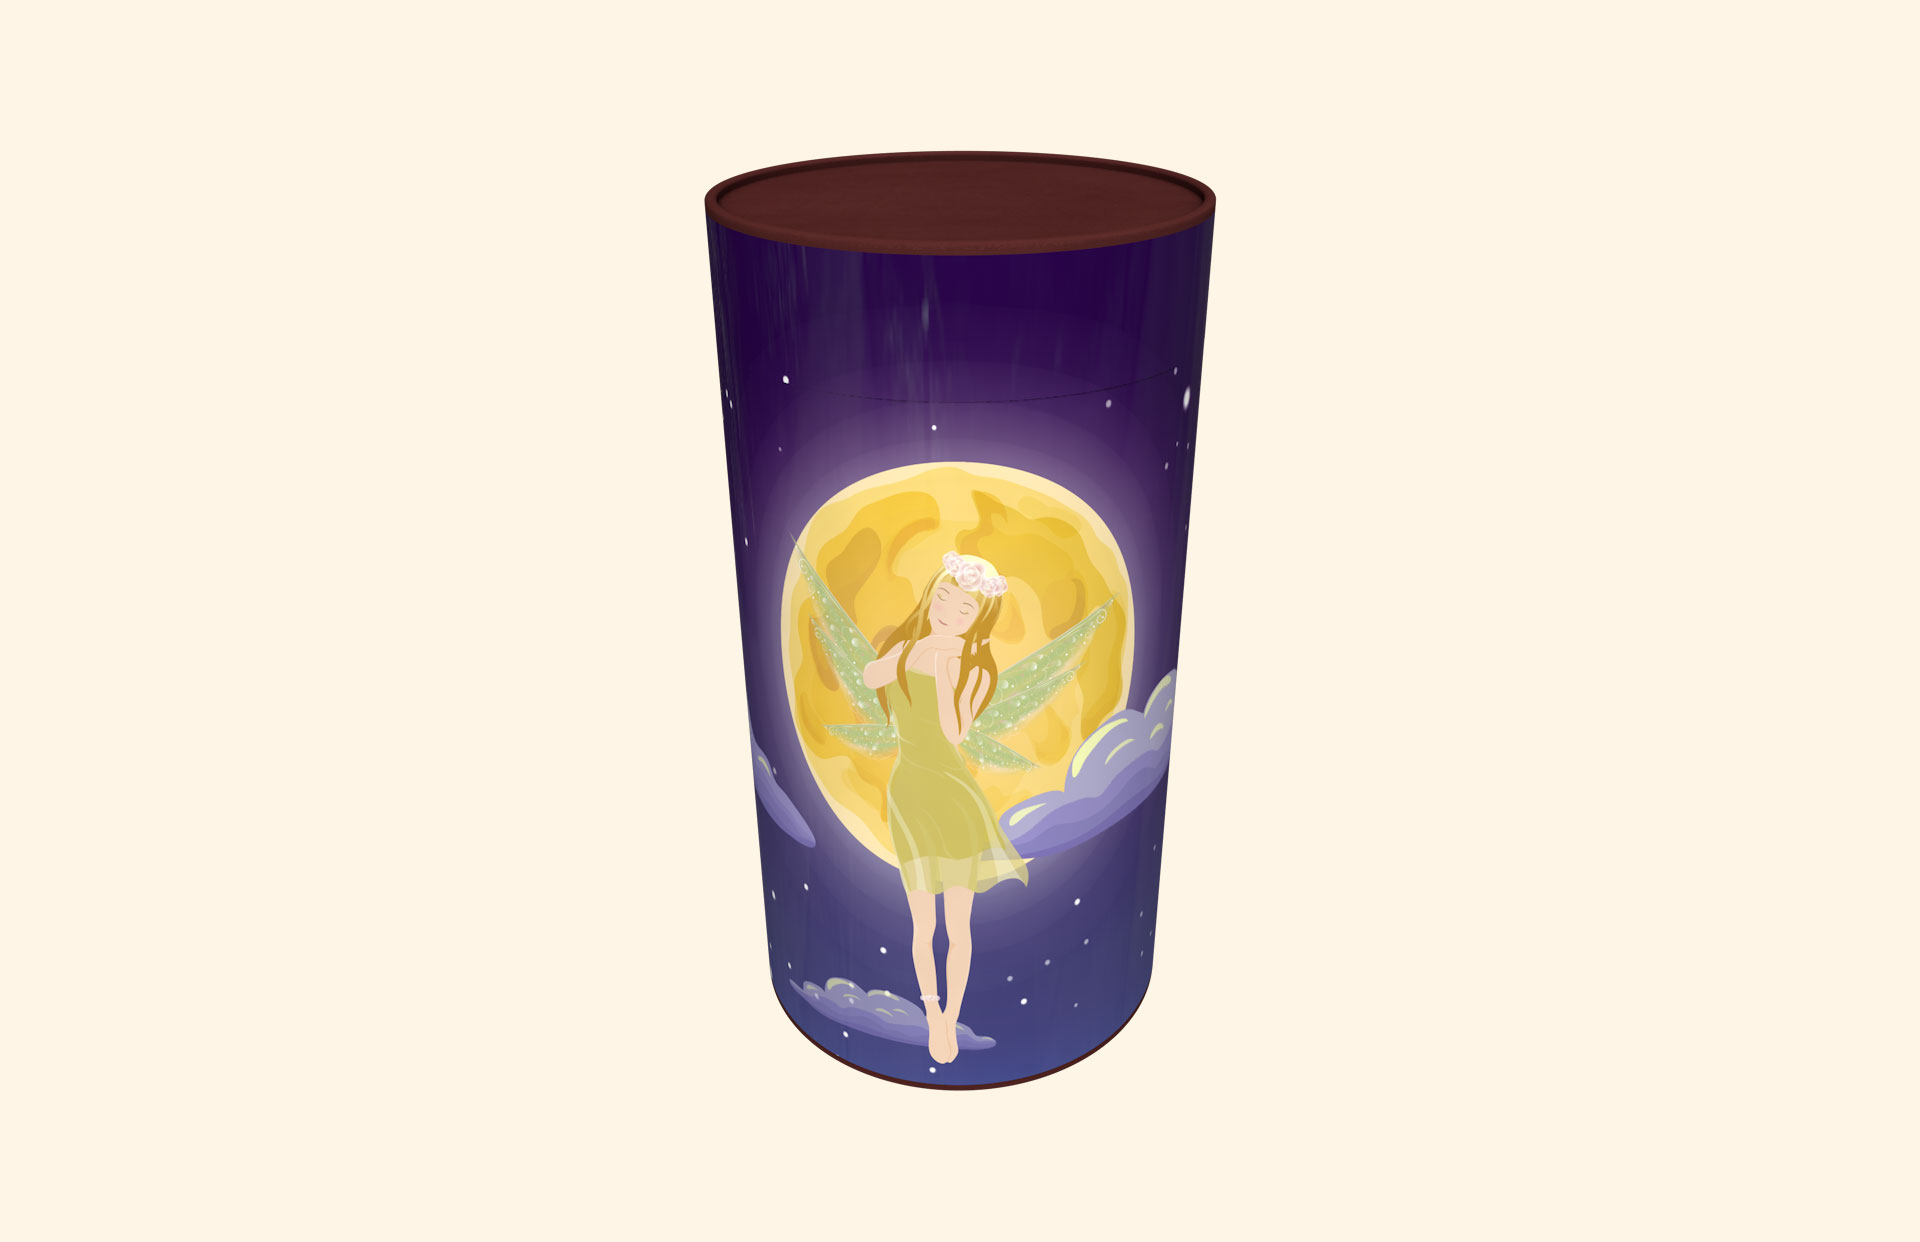 The Moon Fairy child scatter tube